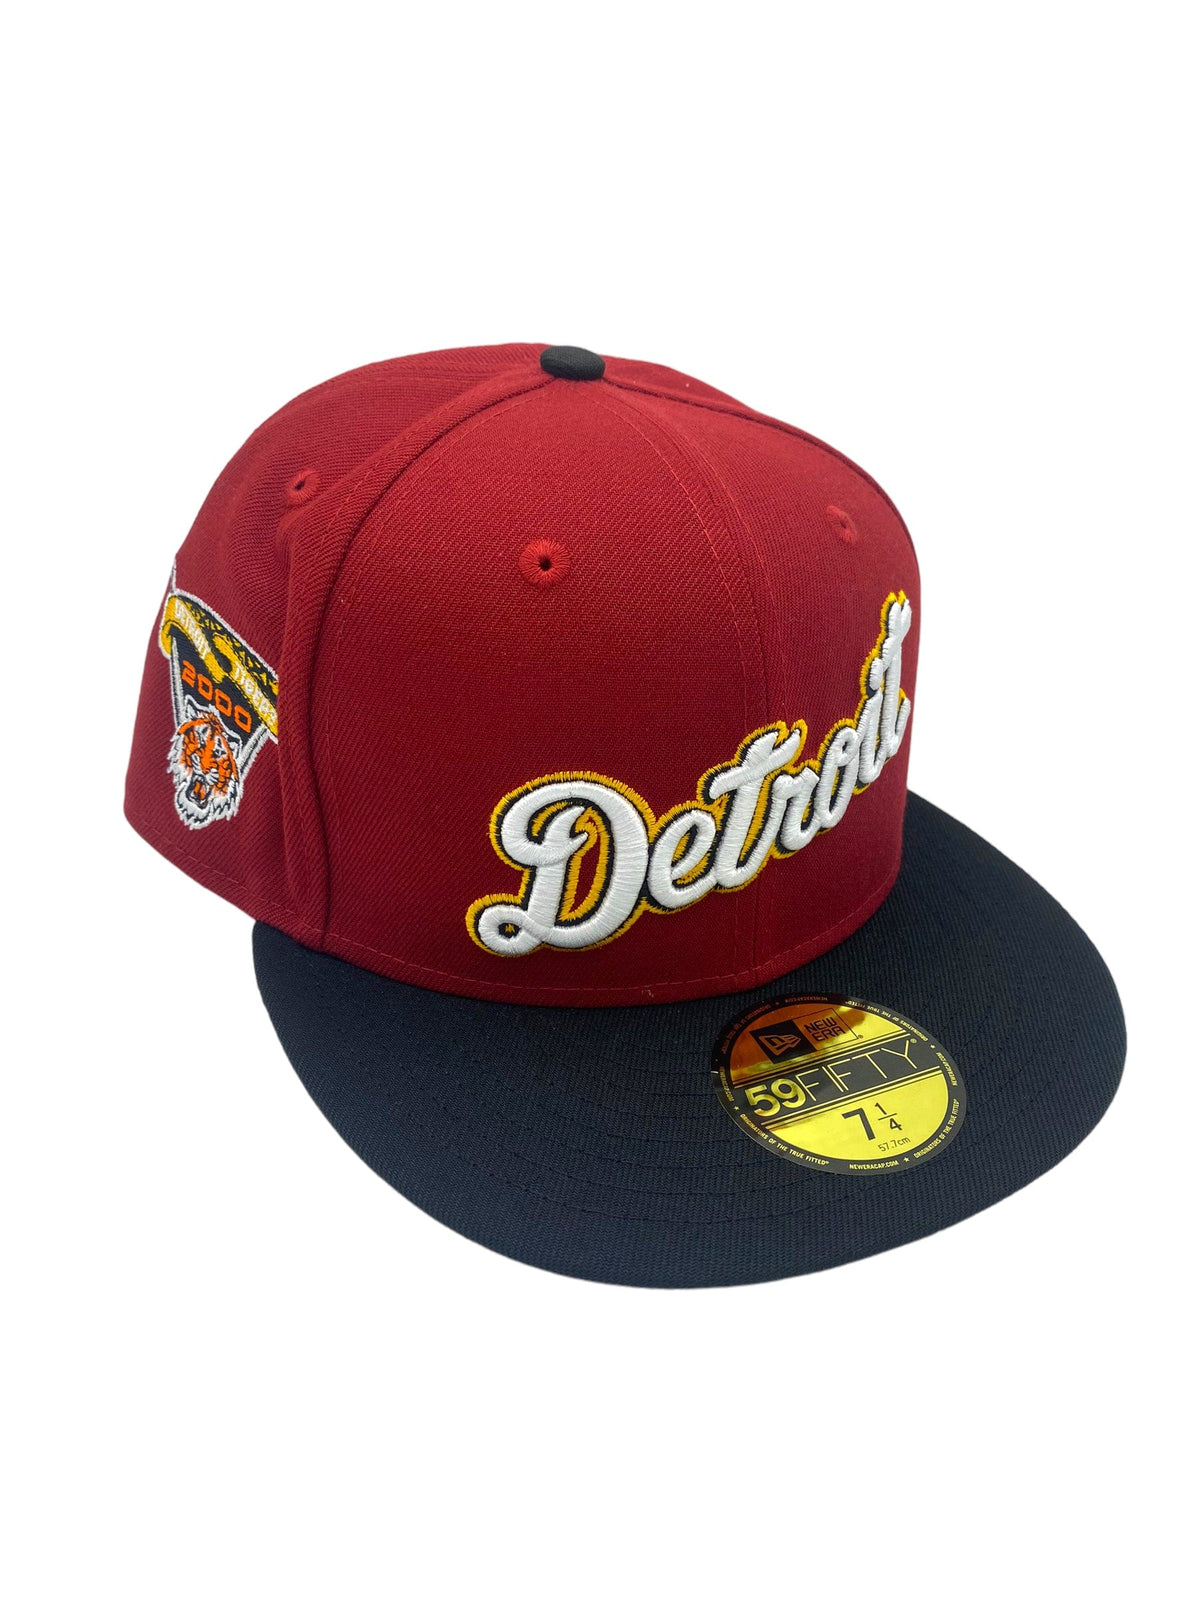 New Era Men's Detroit Tigers Navy 59Fifty Authentic Collection